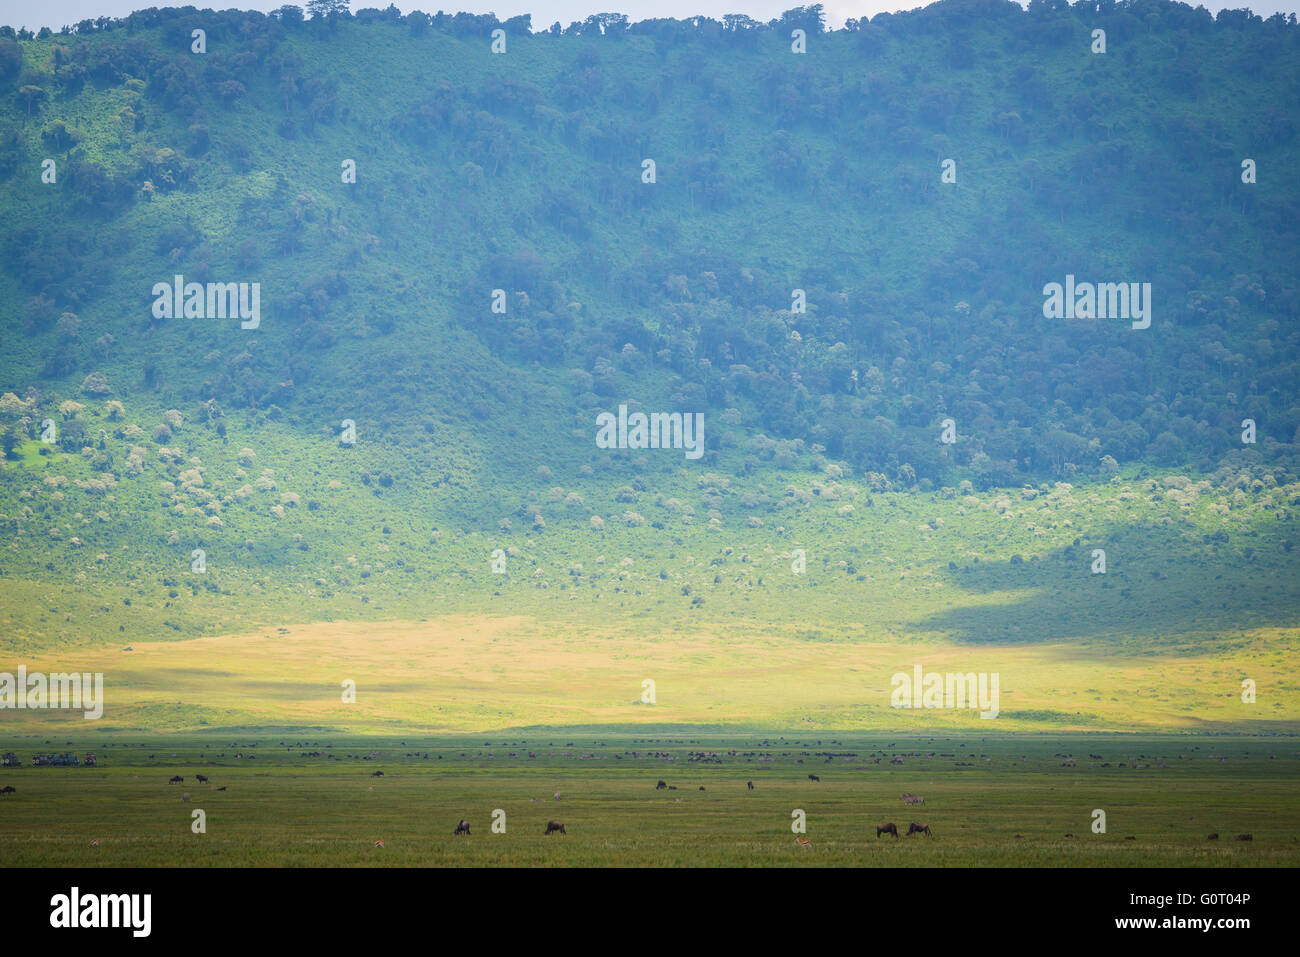 A landscape view across the grass plains of the Ngorongoro Crater and Conservation Area in Tanzania, East Africa Stock Photo